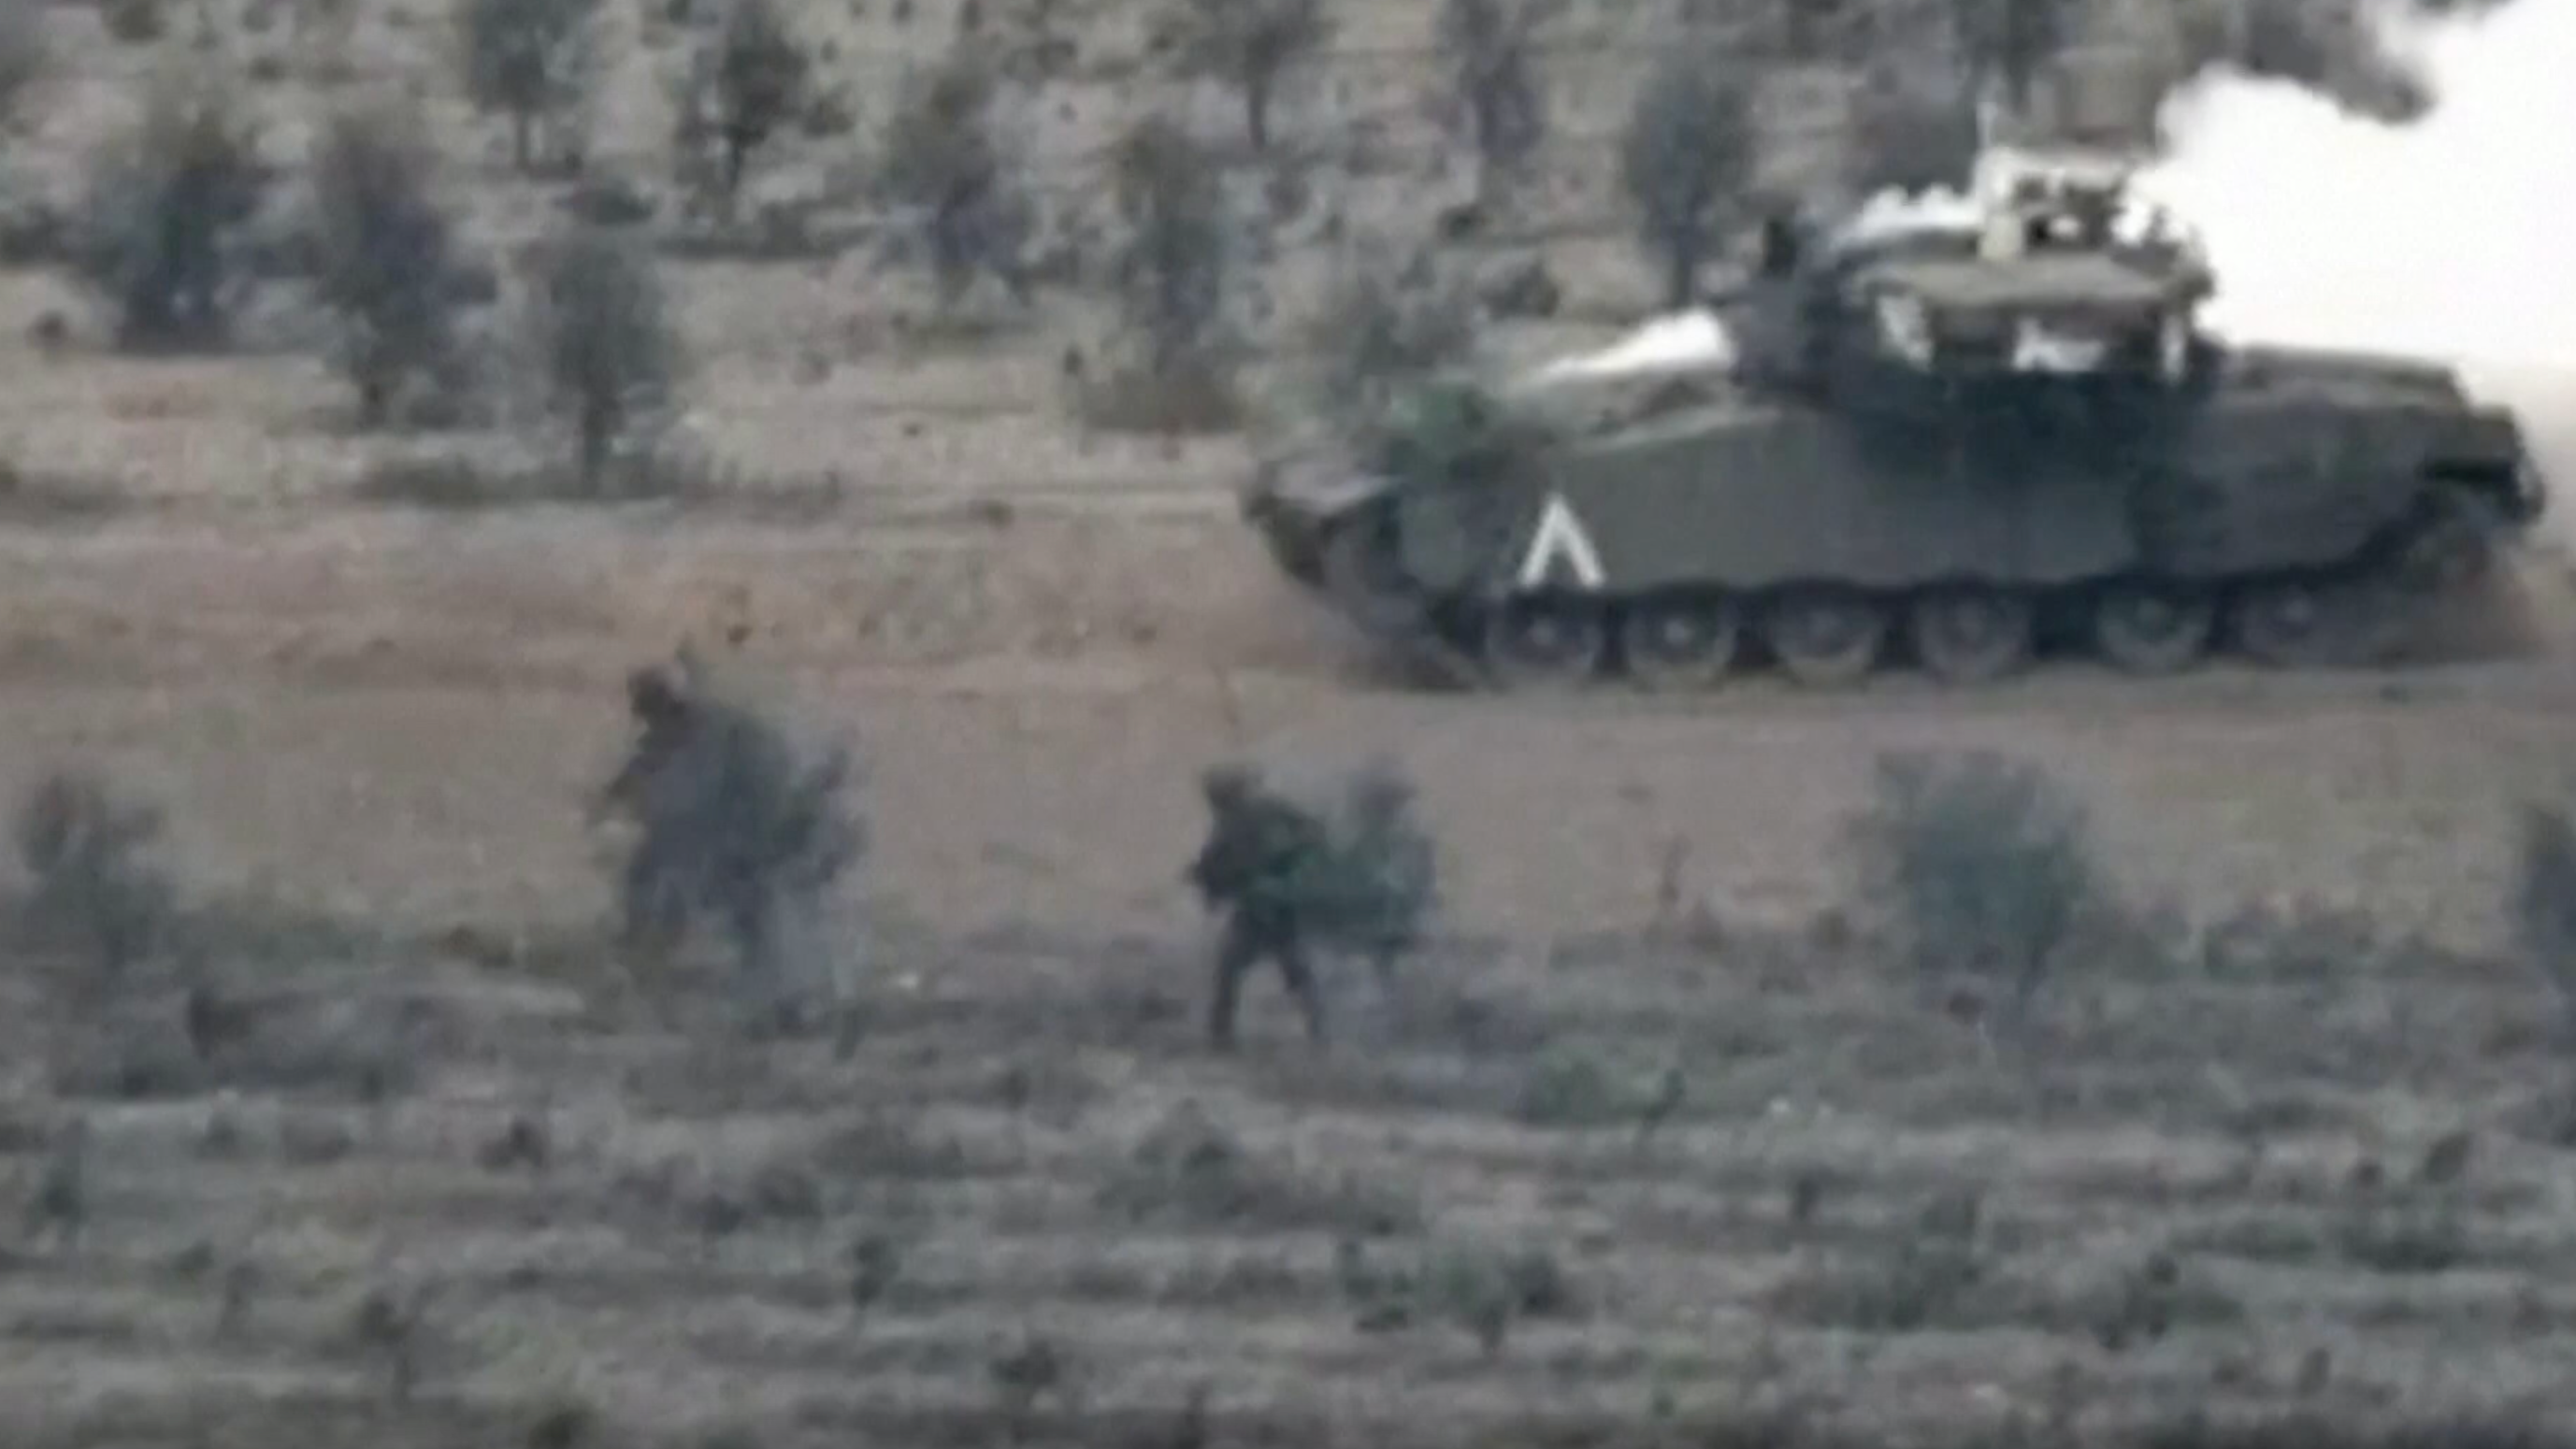 Footage which is said to show Israeli troops and tanks in the Gaza Strip